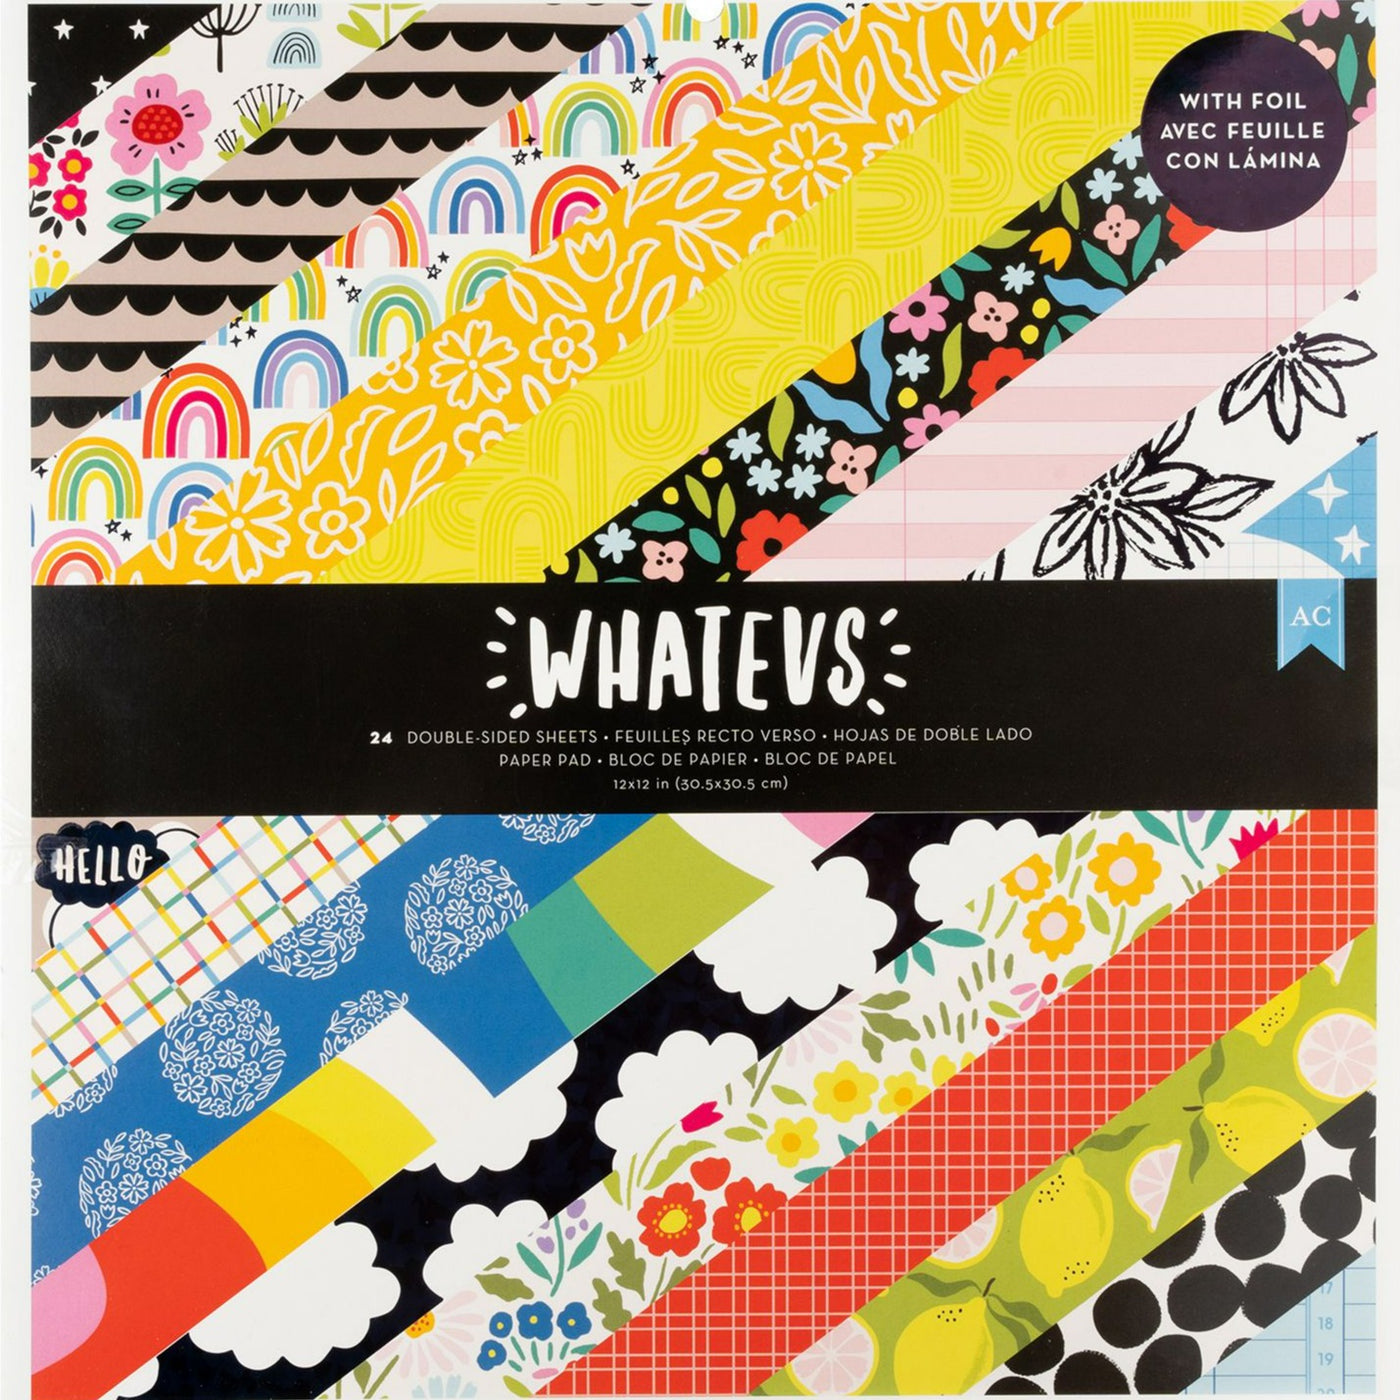 Increase your paper crafting potential with Whatevs 12x12 Paper Pad. With 24 sheets of various floral, plaid, and scallop designs, get inspired to create stunning crafts and cards. Versatile and high-quality, elevate your projects with ease.